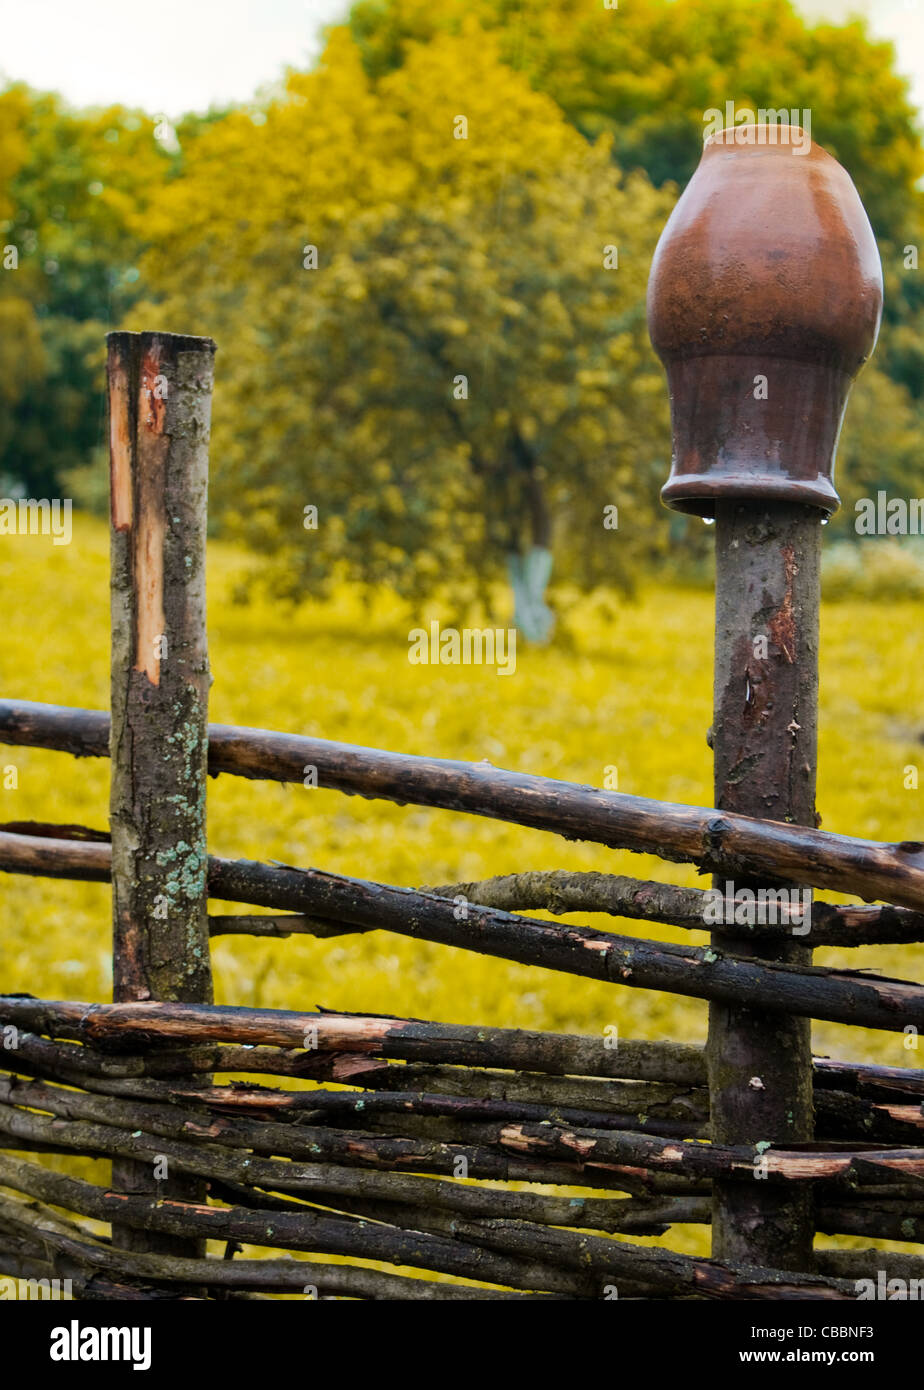 Pot On Wooden Farm Fence With Grass And Tree In Background Stock